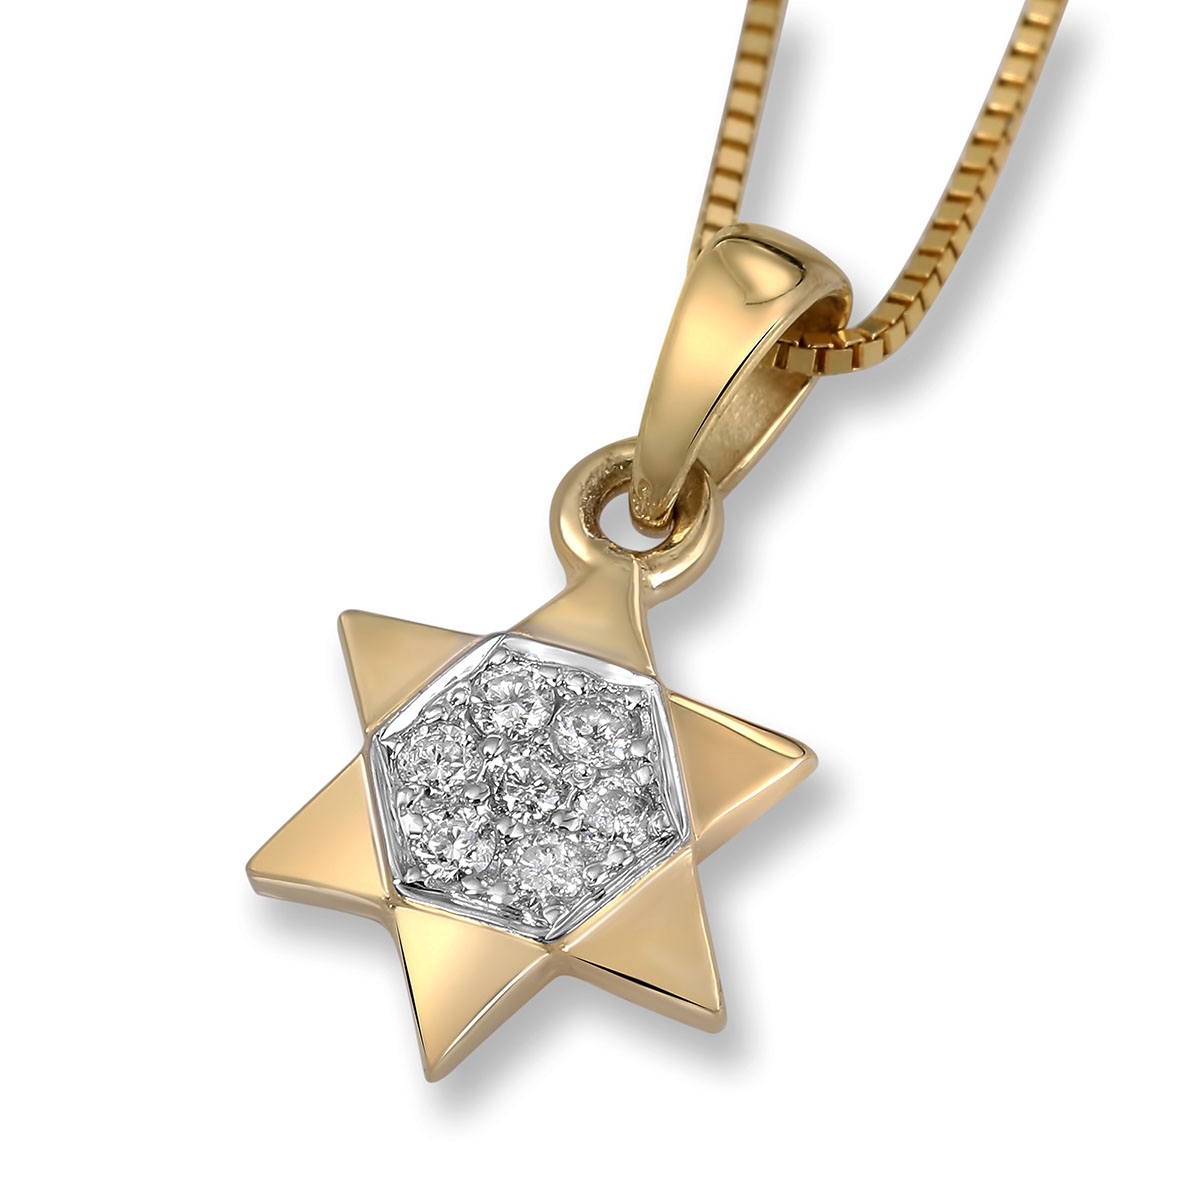 14K Gold Star of David Pendant Necklace with Diamonds - 1